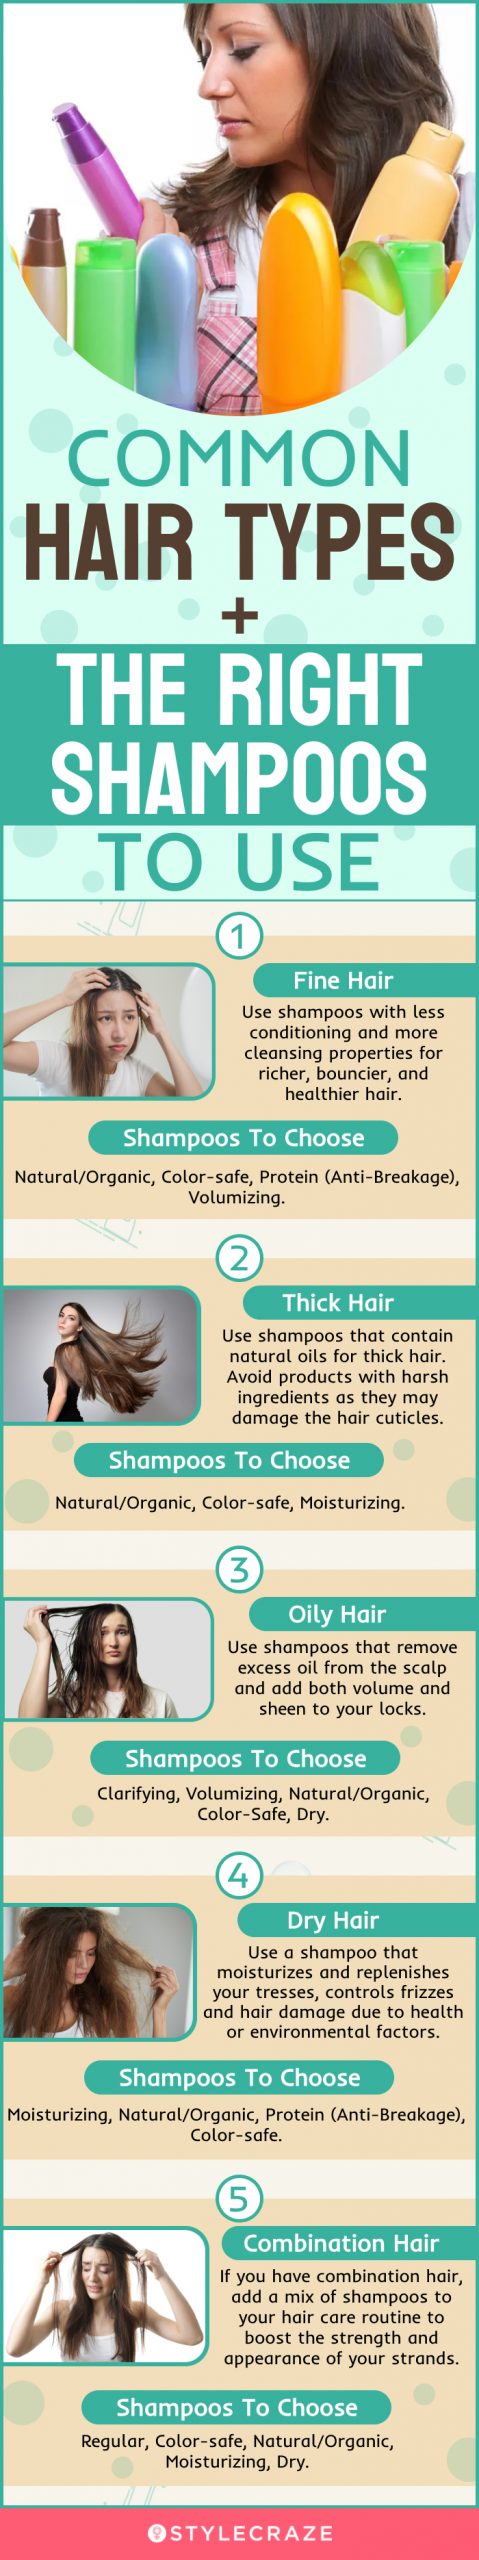 common hair types + the right shampoos to use (infographic)